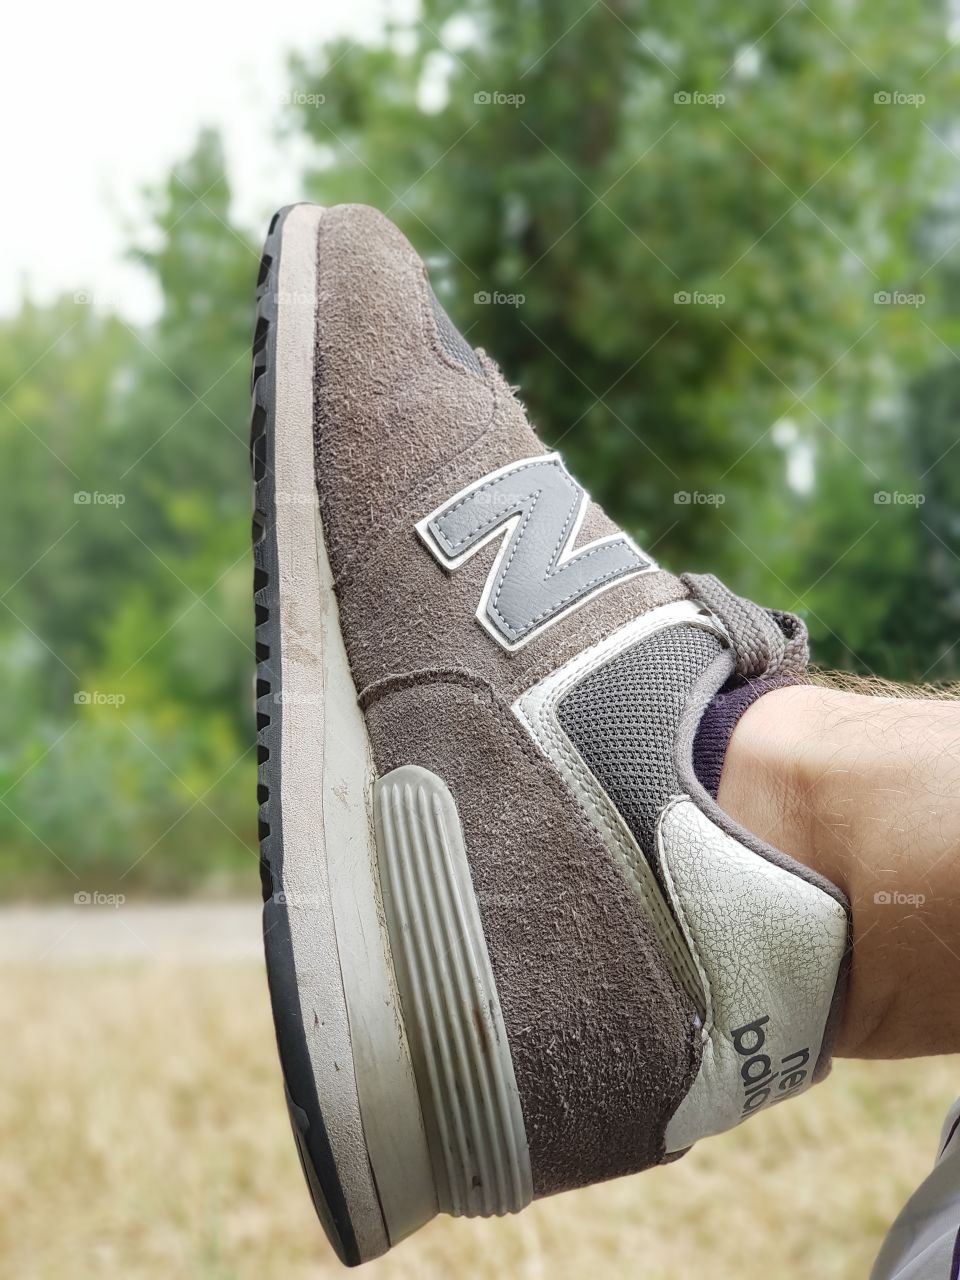 New Balance Outside in nature